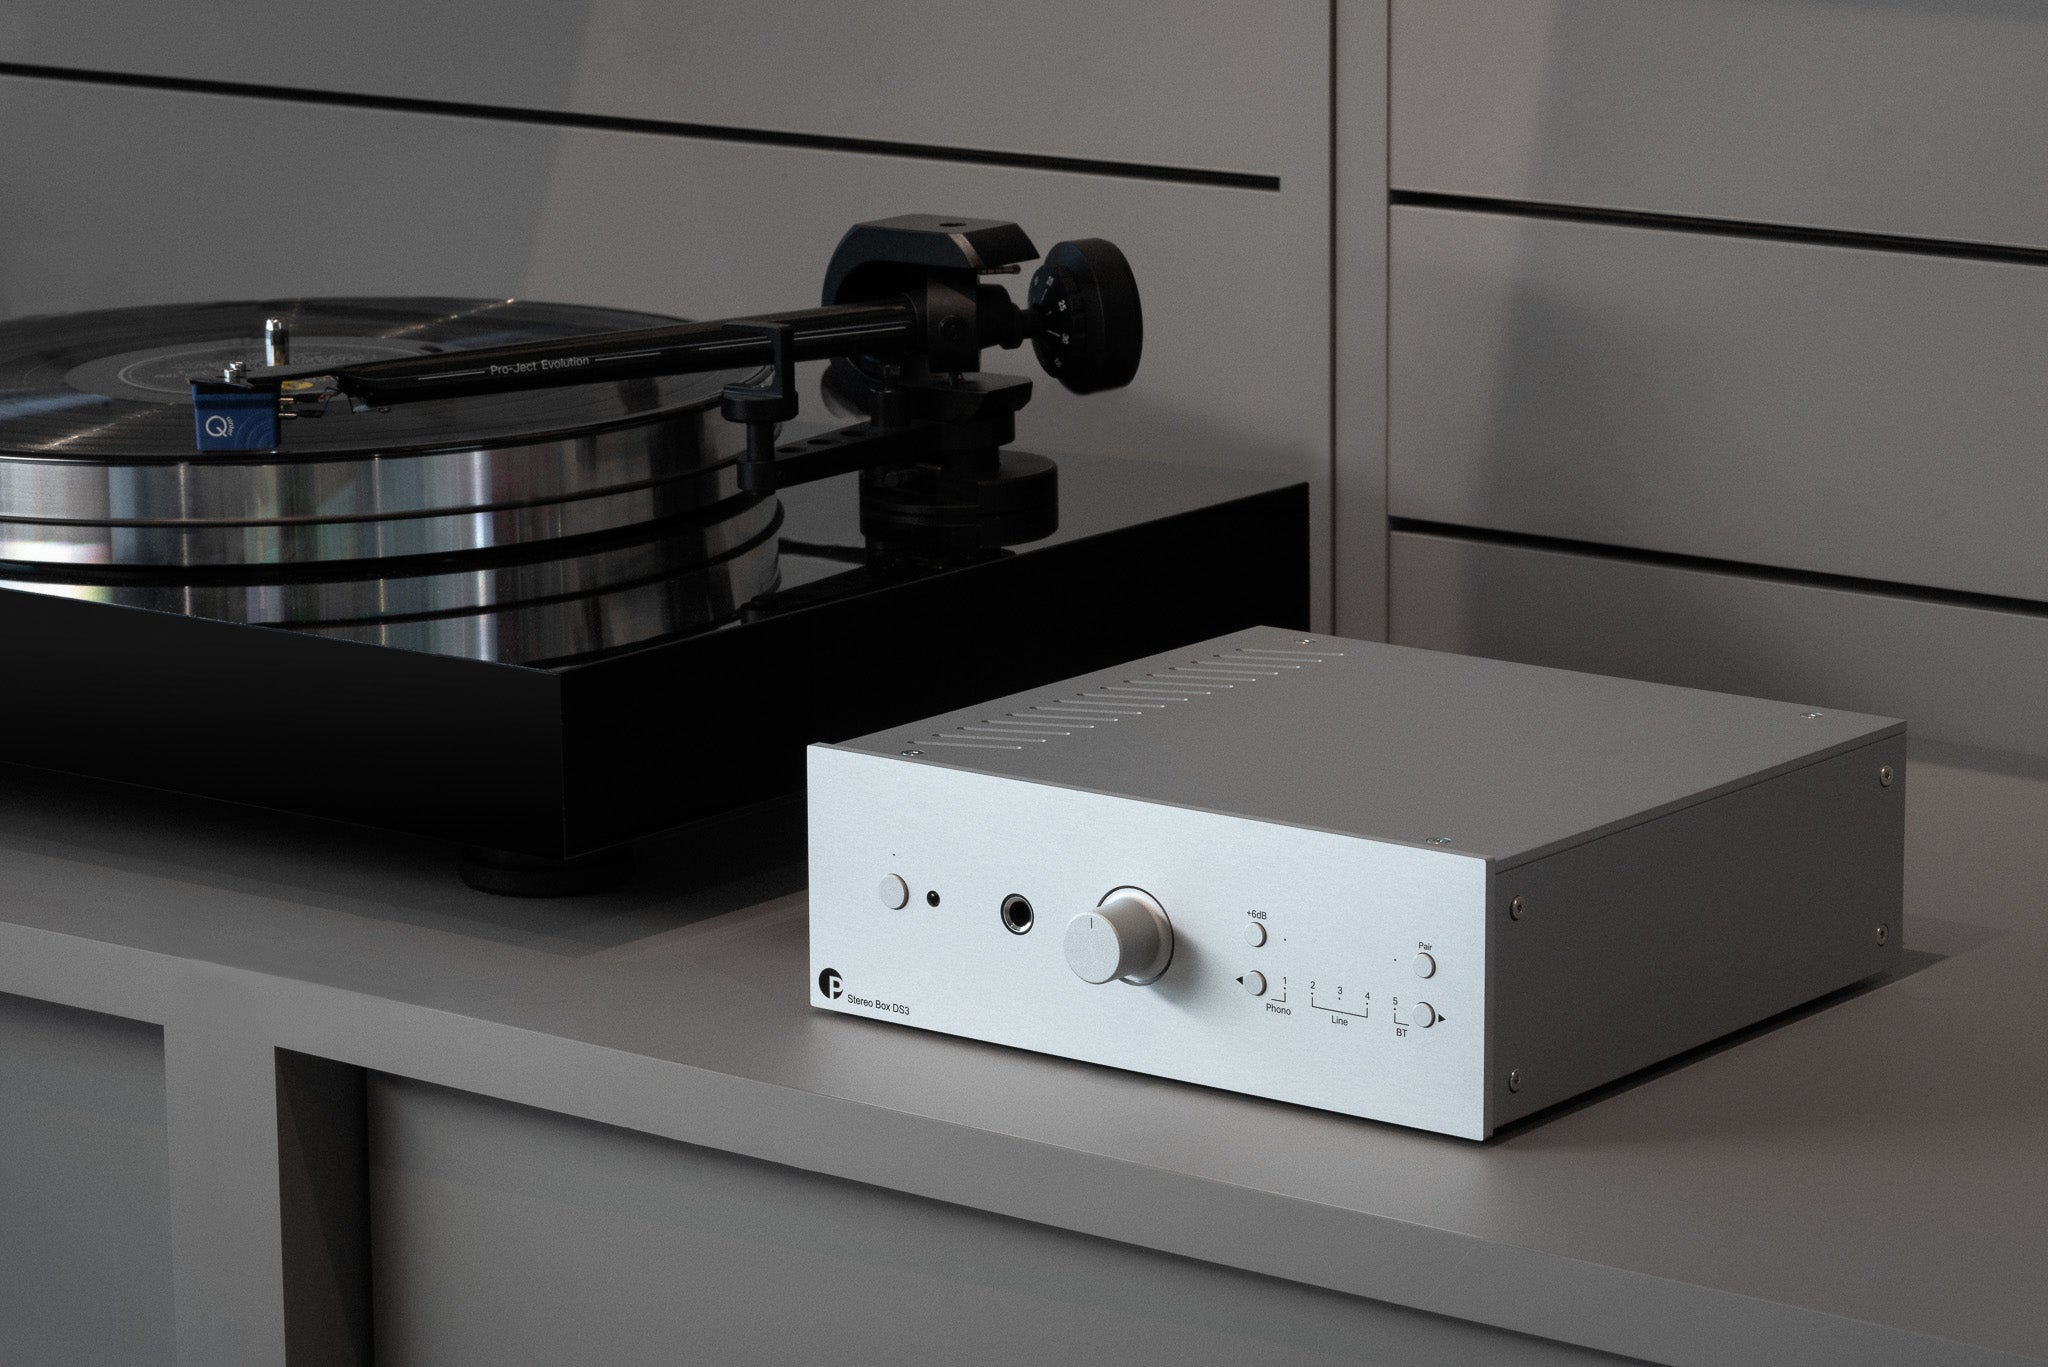 Pro-Ject Stereo Box DS3 integrated amplifier